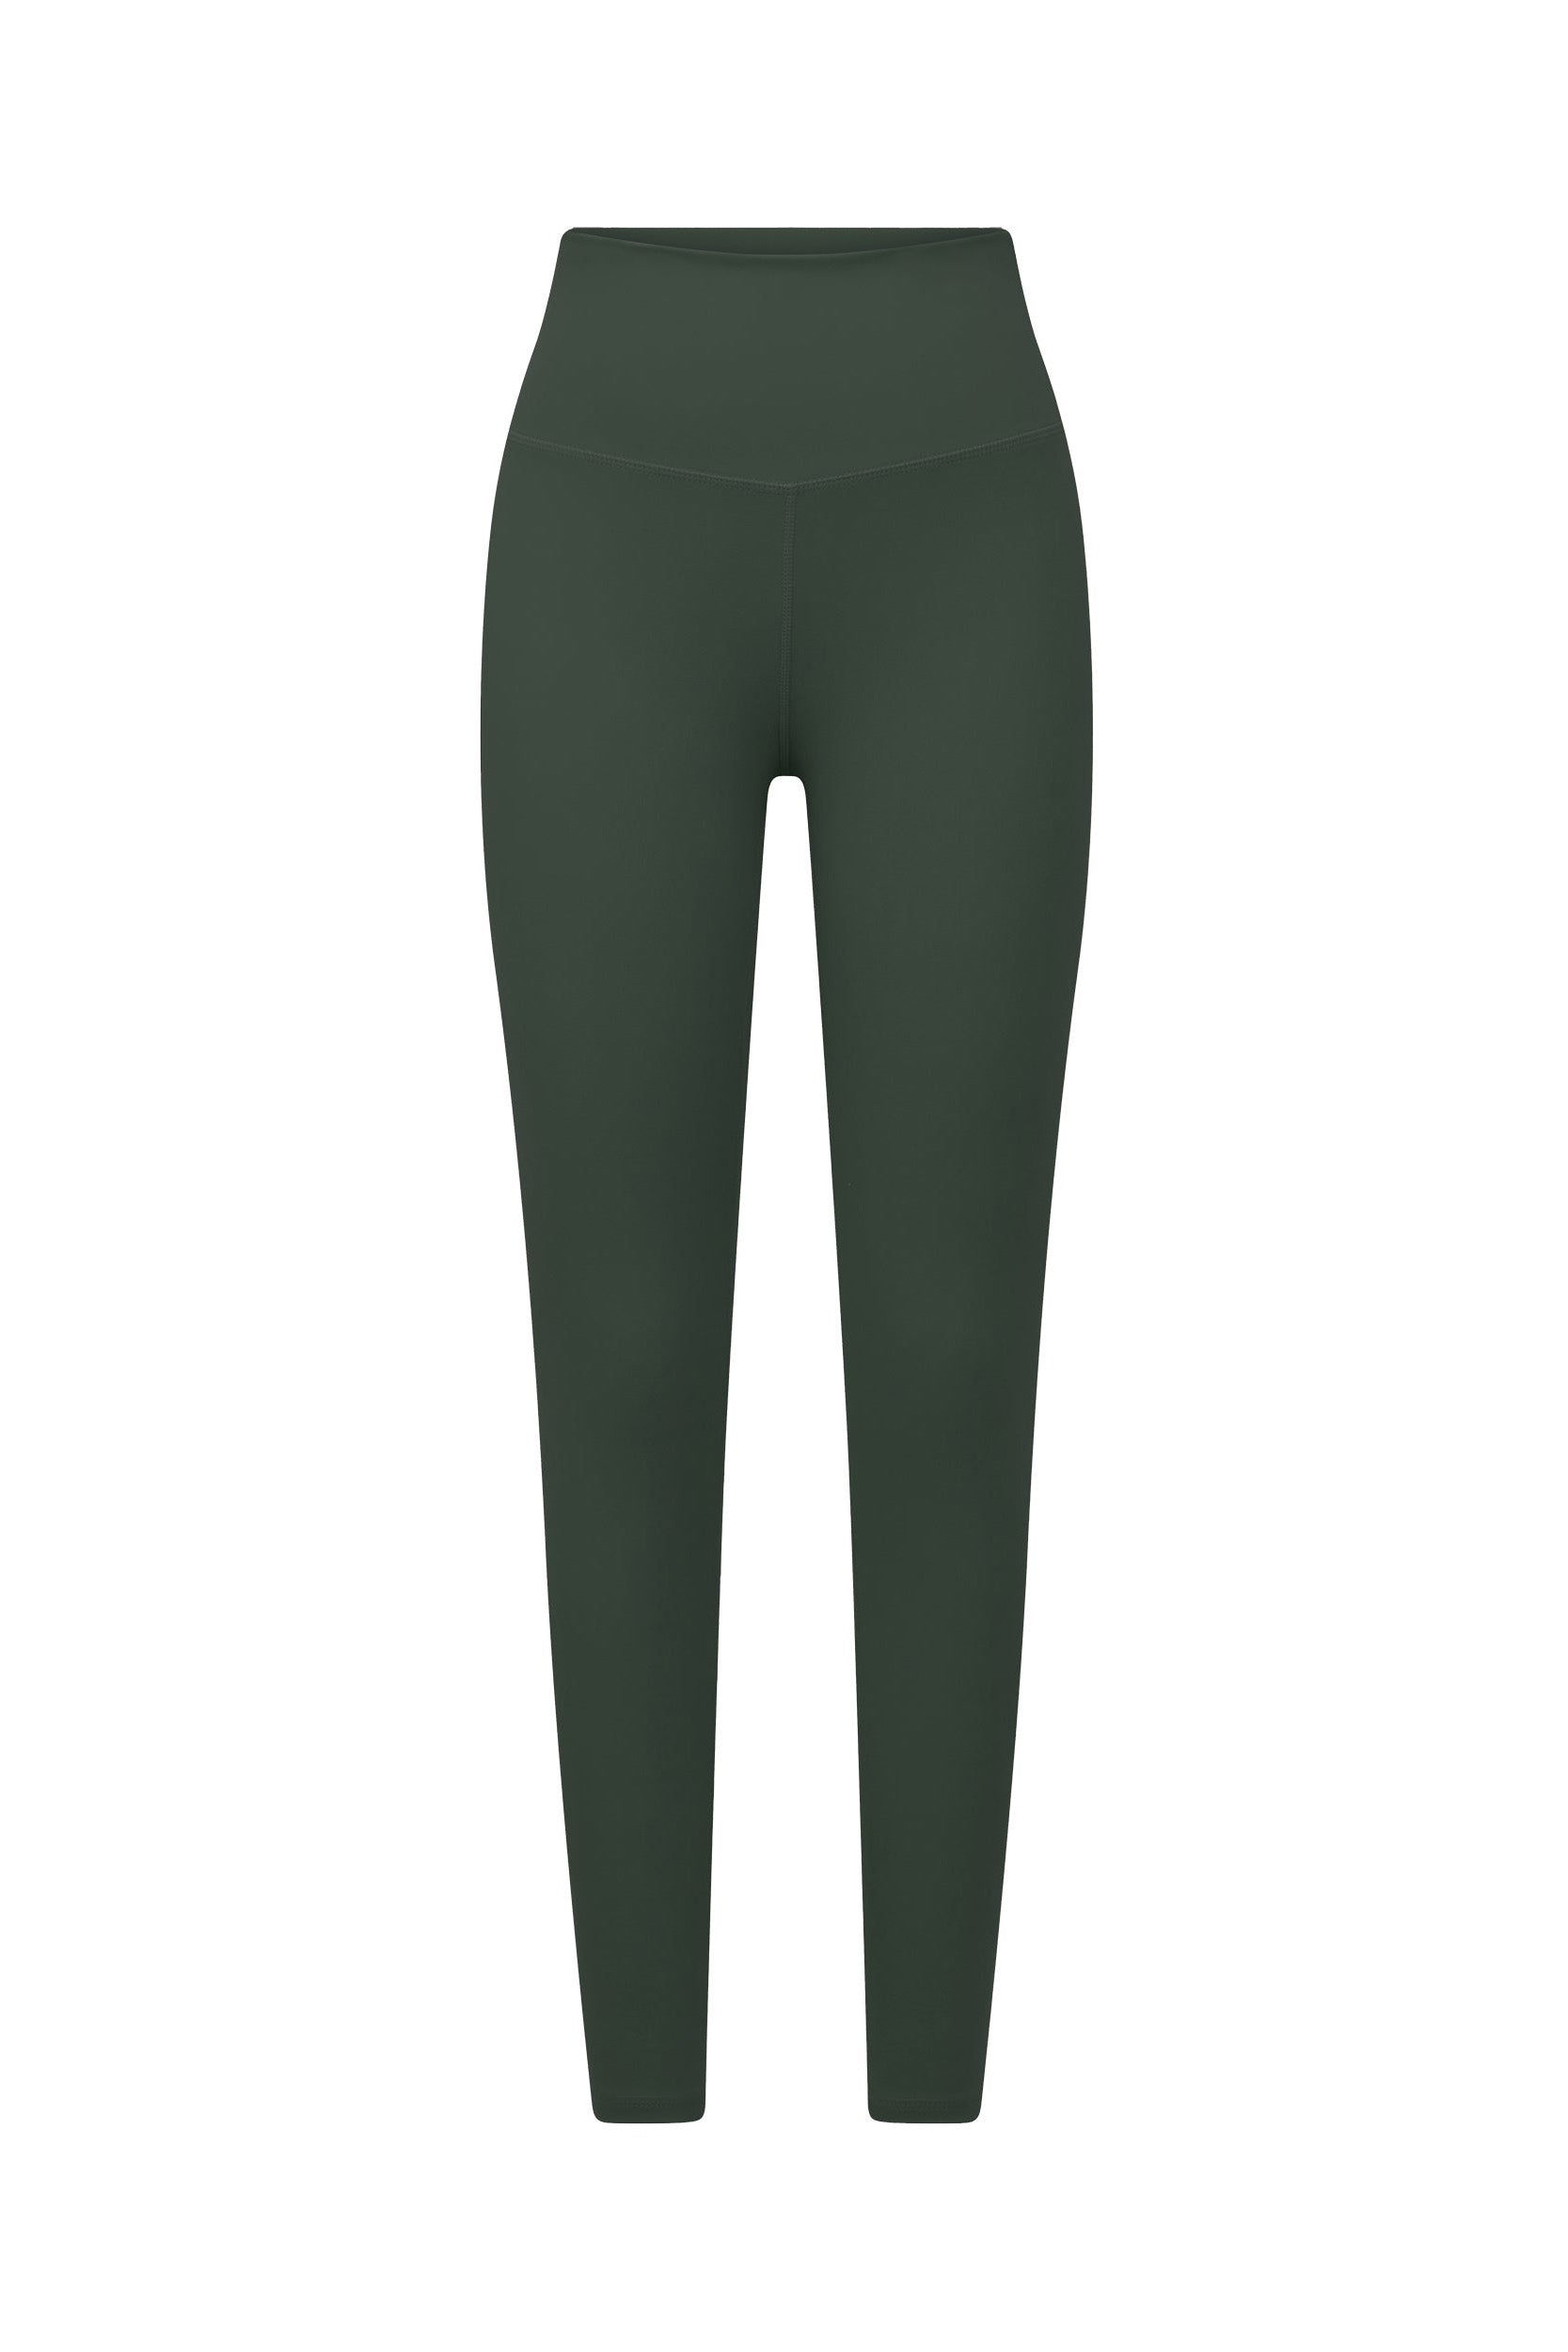 The Limitless Legging - Evergreen is showcased, featuring a high-waisted, full-length design in dark green. These sculpting leggings offer a smooth, seamless finish with a snug fit and moisture-wicking fabric, making them ideal for yoga, workouts, or casual wear. They are designed without any visible logos or embellishments.